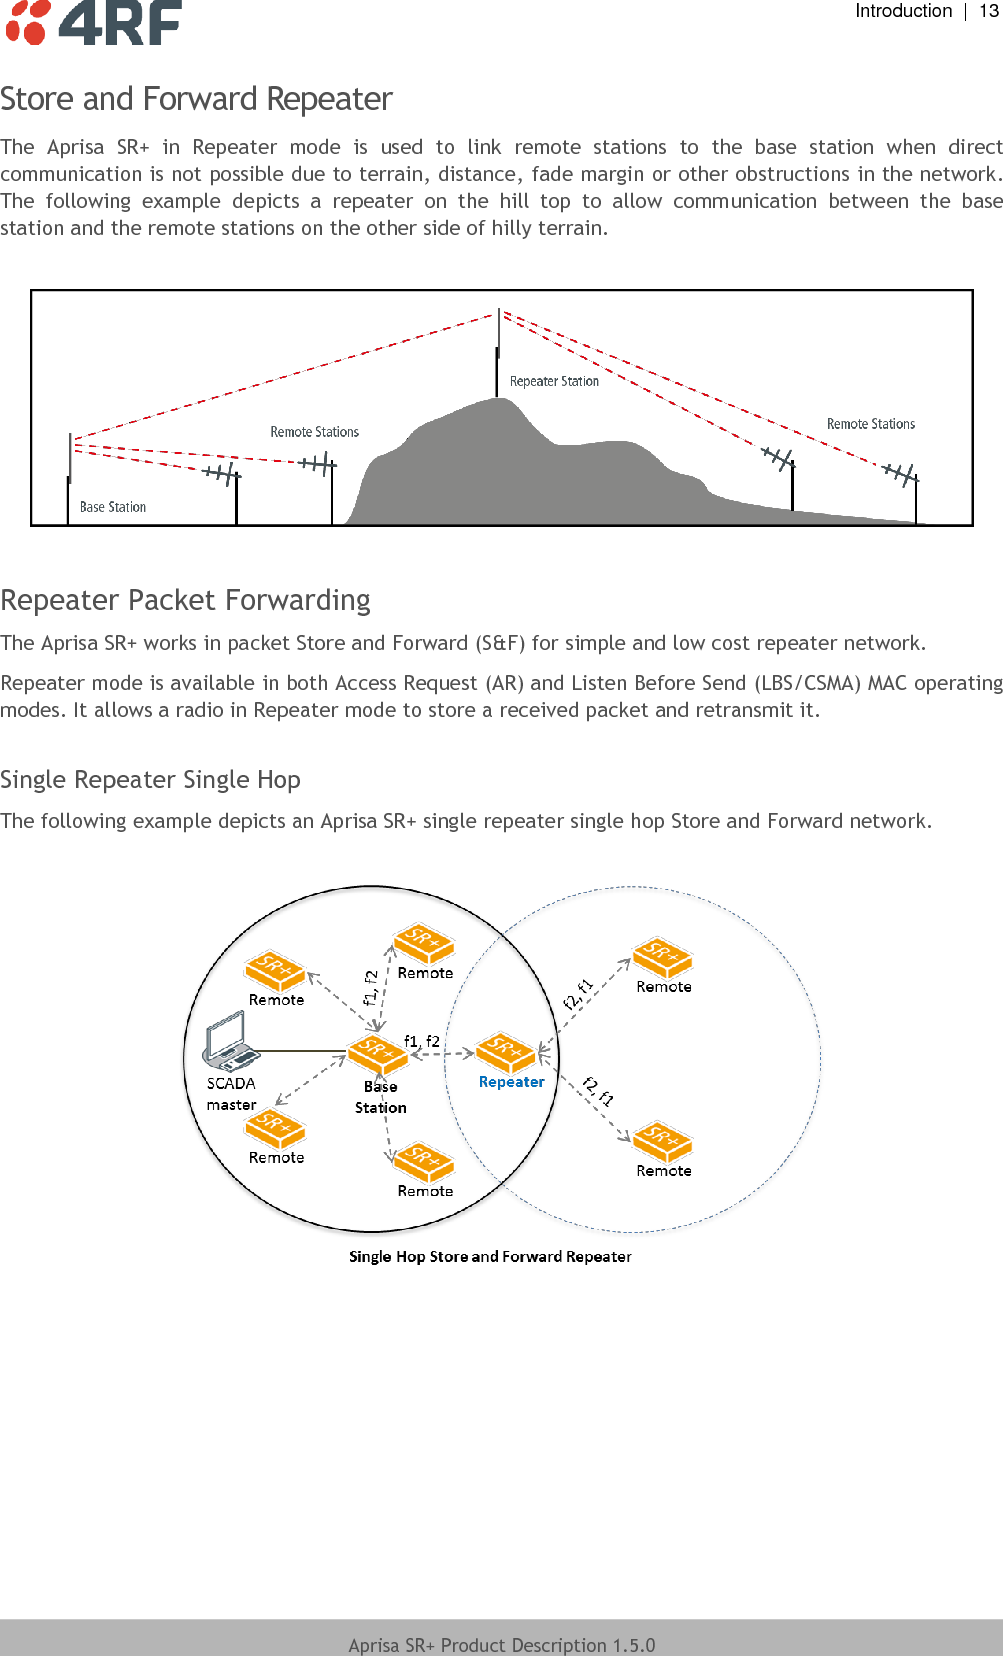  Introduction  |  13  Aprisa SR+ Product Description 1.5.0  Store and Forward Repeater The  Aprisa  SR+  in  Repeater  mode  is  used  to  link  remote  stations  to  the  base  station  when  direct communication is not possible due to terrain, distance, fade margin or other obstructions in the network. The  following  example  depicts  a  repeater  on  the  hill  top  to  allow  communication  between  the  base station and the remote stations on the other side of hilly terrain.    Repeater Packet Forwarding The Aprisa SR+ works in packet Store and Forward (S&amp;F) for simple and low cost repeater network.  Repeater mode is available in both Access Request (AR) and Listen Before Send (LBS/CSMA) MAC operating modes. It allows a radio in Repeater mode to store a received packet and retransmit it.   Single Repeater Single Hop The following example depicts an Aprisa SR+ single repeater single hop Store and Forward network.       